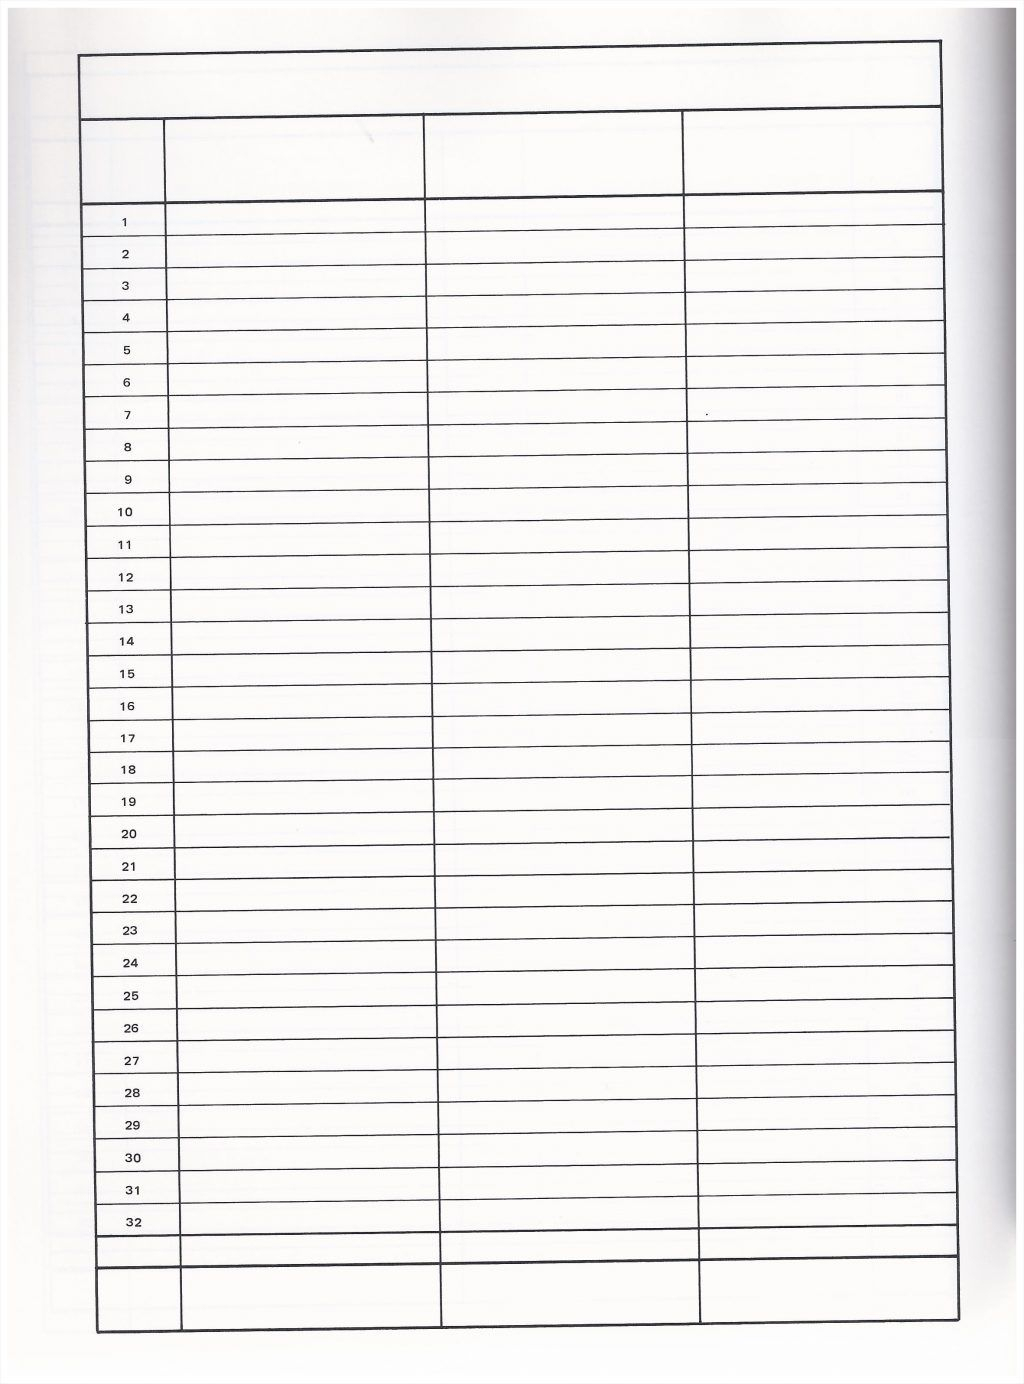 10 Best Images Of Printable Blank Charts With Columns 4 3 - Free Printable 4 Column Ledger Paper